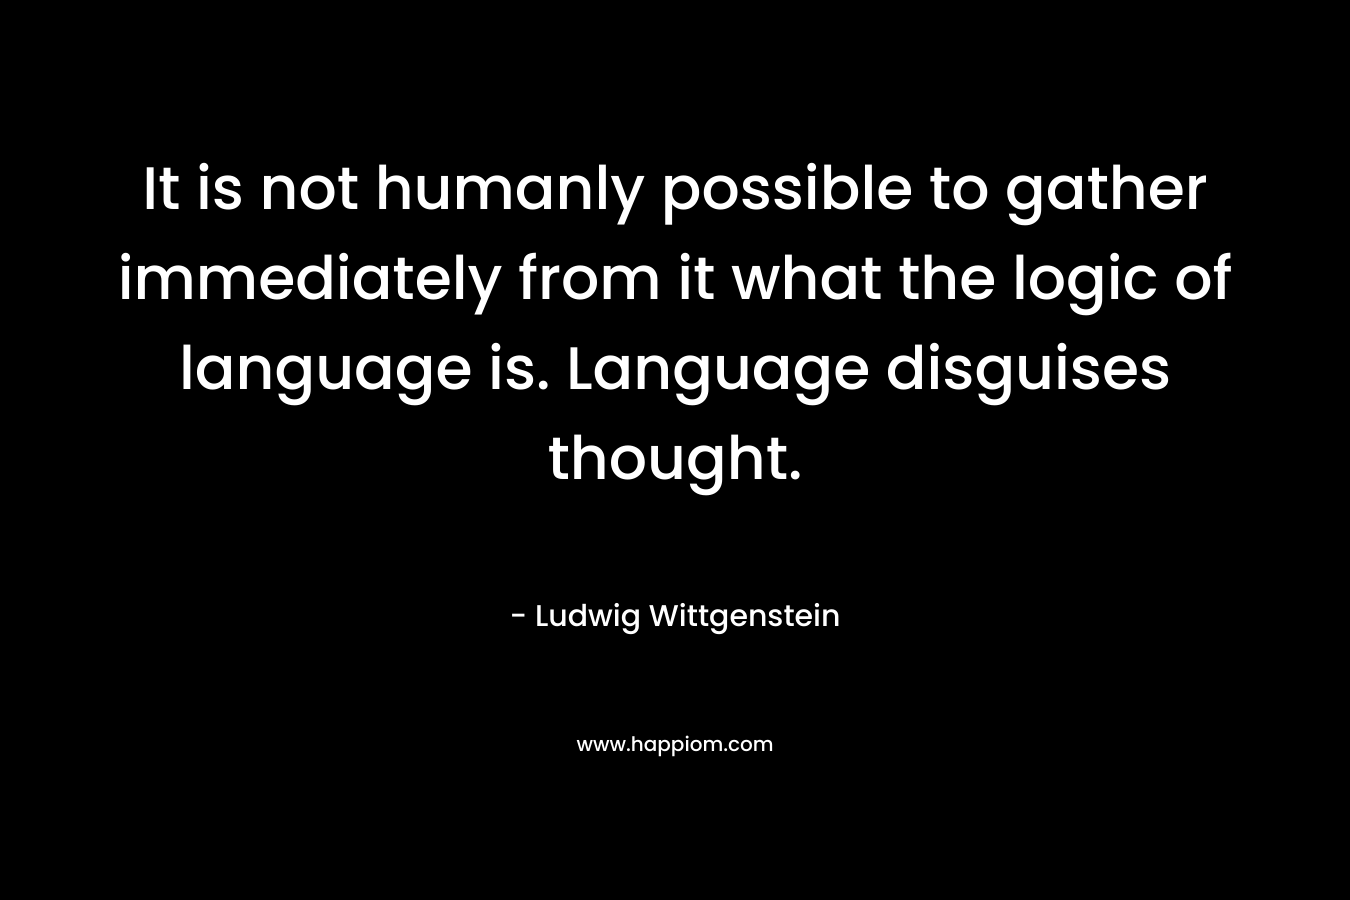 It is not humanly possible to gather immediately from it what the logic of language is. Language disguises thought. – Ludwig Wittgenstein